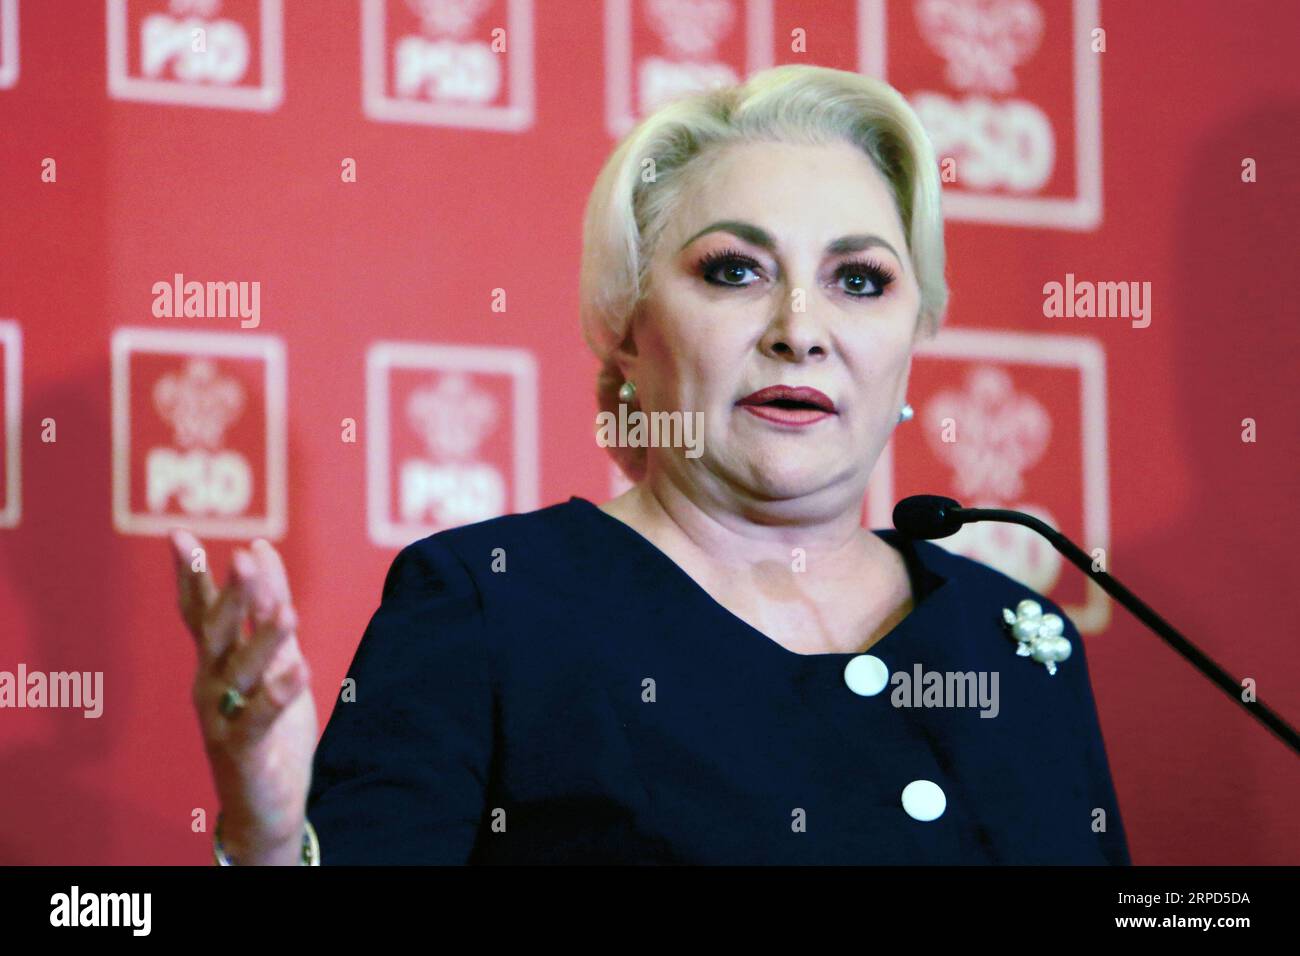 (190723) -- BUCHAREST, July 23, 2019 (Xinhua) -- Romanian Prime Minister Viorica Dancila addresses journalists after being nominated as presidential candidate?in Bucharest, capital of Romania, on July 23, 2019. Romania s main ruling Social Democratic Party on Tuesday named its national leader and incumbent prime minister Viorica Dancila as presidential candidate for the upcoming election in late autumn. (Xinhua/Cristian Cristel) ROMANIA-BUCHAREST-PM-PRESIDENTIAL CANDIDATE-NOMINATION PUBLICATIONxNOTxINxCHN Stock Photo